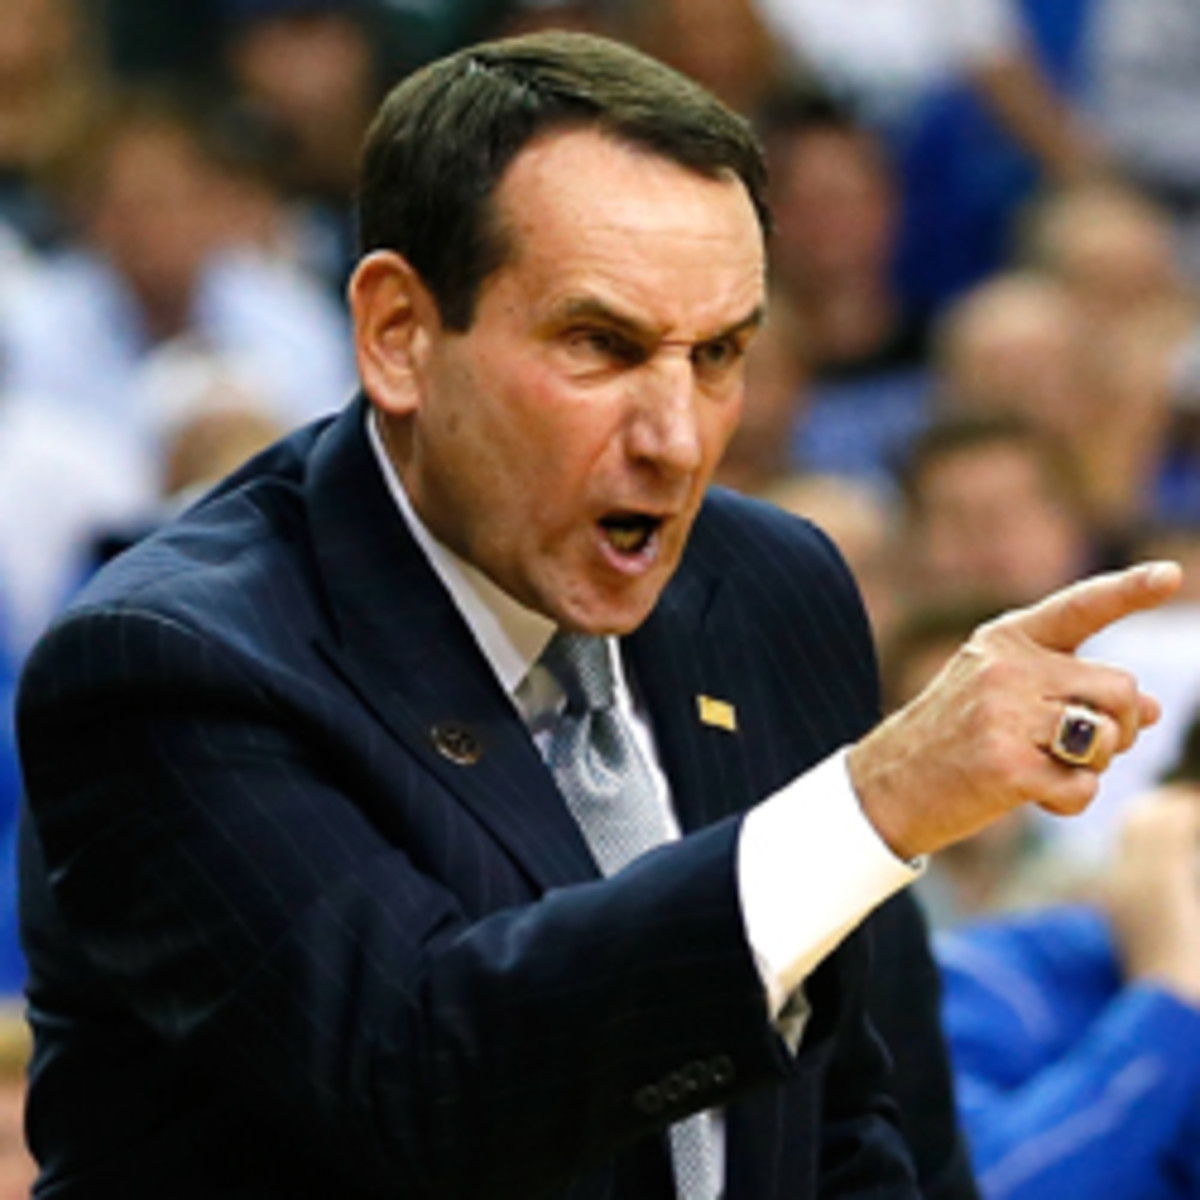 Mike Krzyzewski has been critical of recent conference realignment. (Kevin C. Cox/Getty Images)